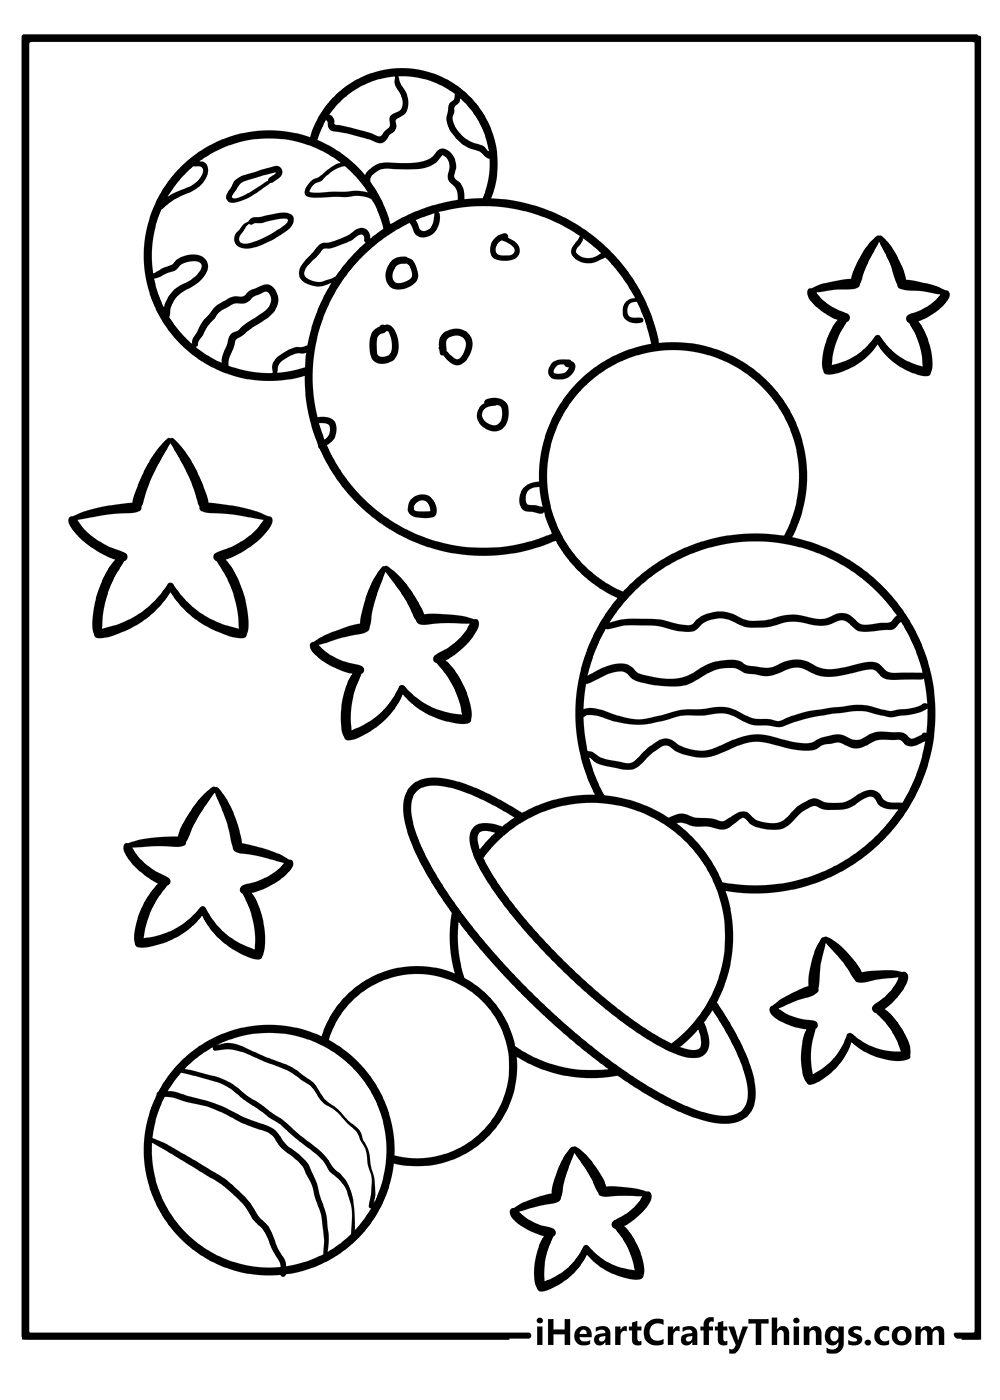 Solar System Coloring Pages free pdf download